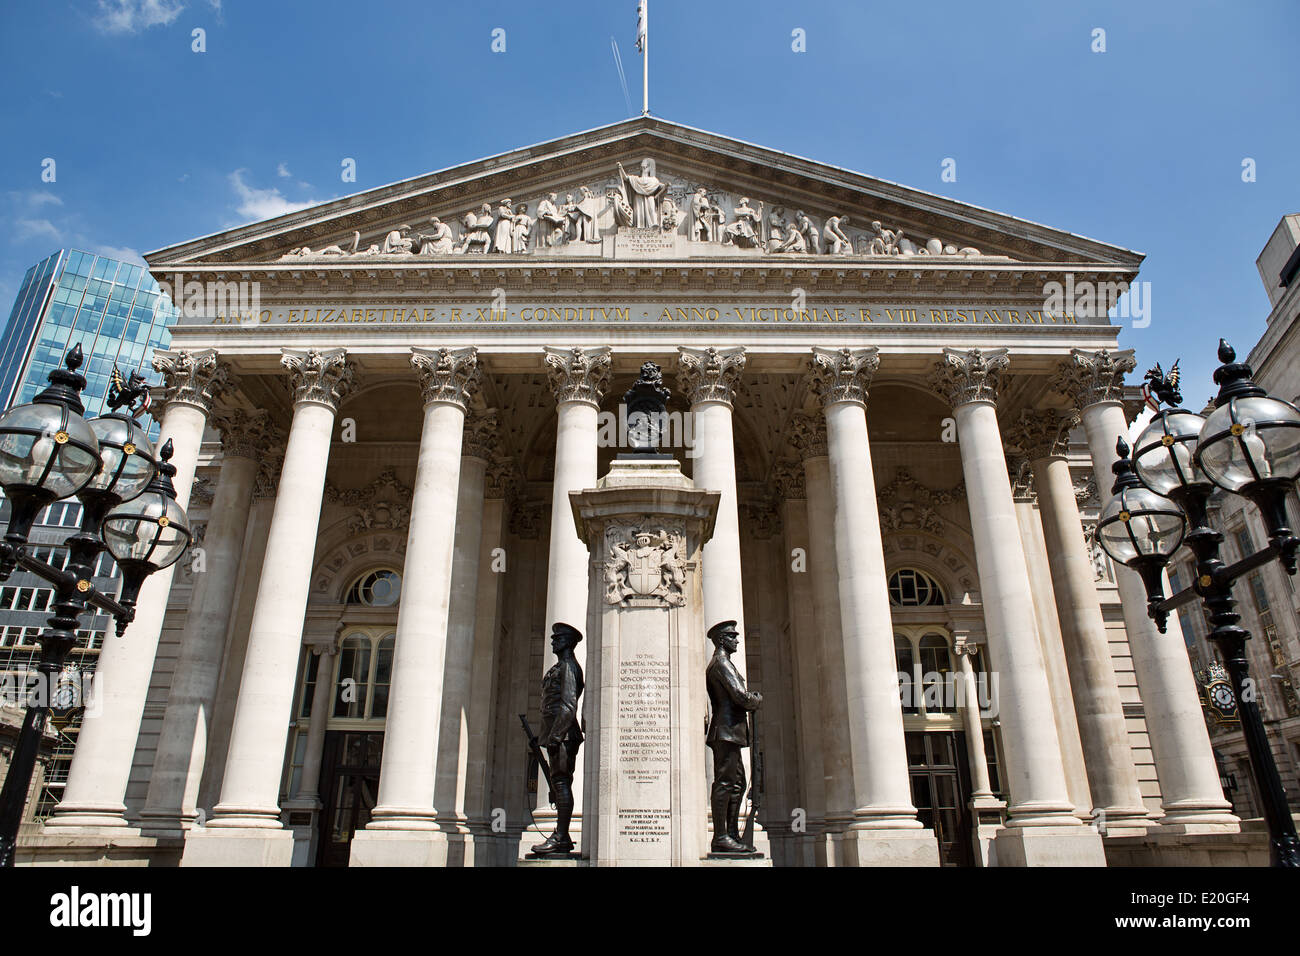 The Royal Exchange in the city of London, UK Stock Photo